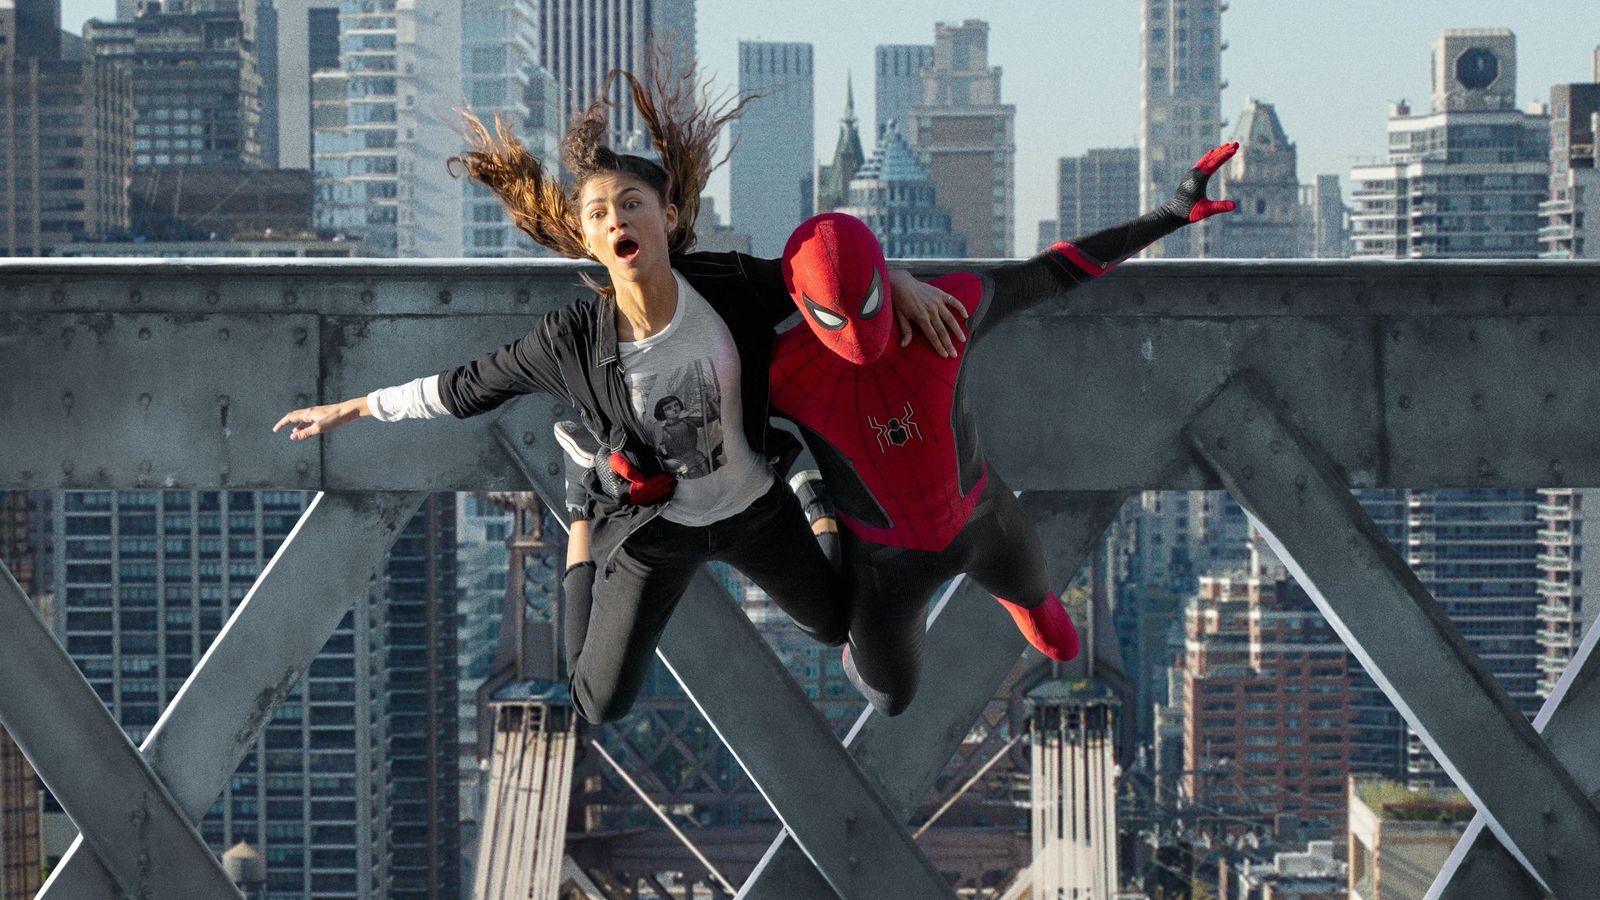 Spider-Man: No Way Home blocked from BAFTA nominations – but could Tom Holland host the Oscars as part of an awards bid?